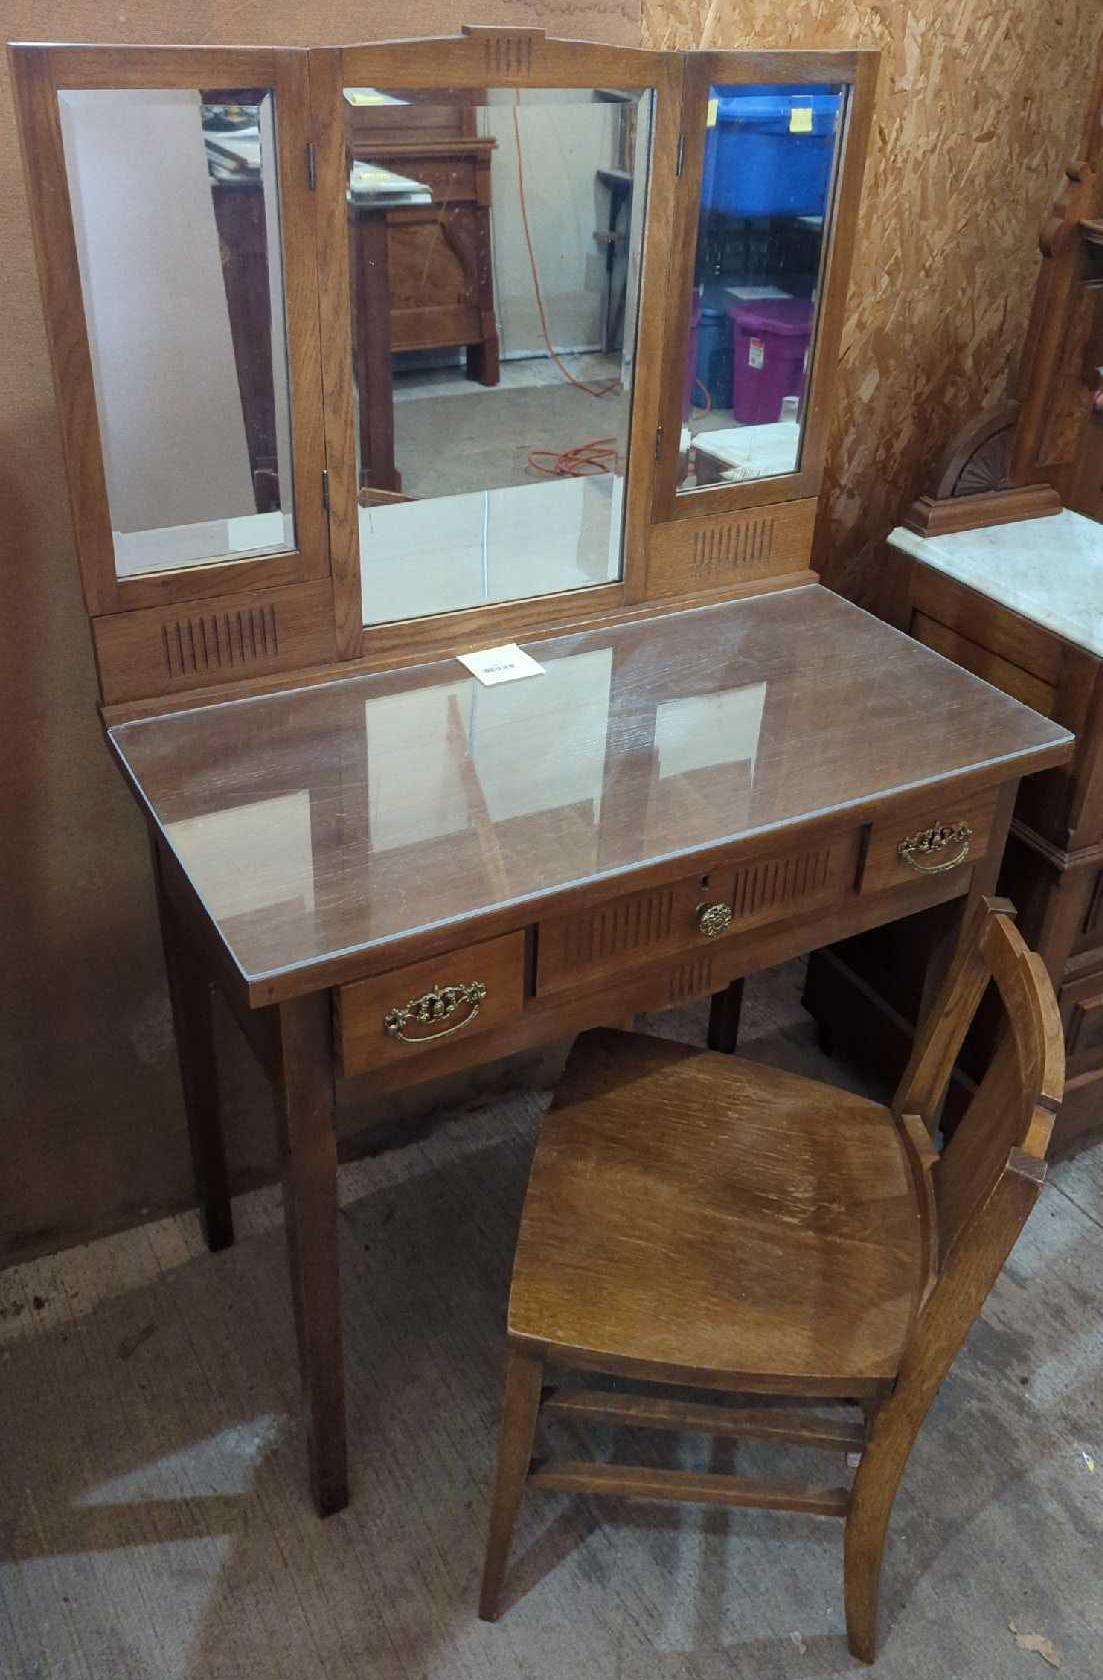 ANTIQUE OAK MIRRORED VANITY WITH CHAIR 55.5x36"x19